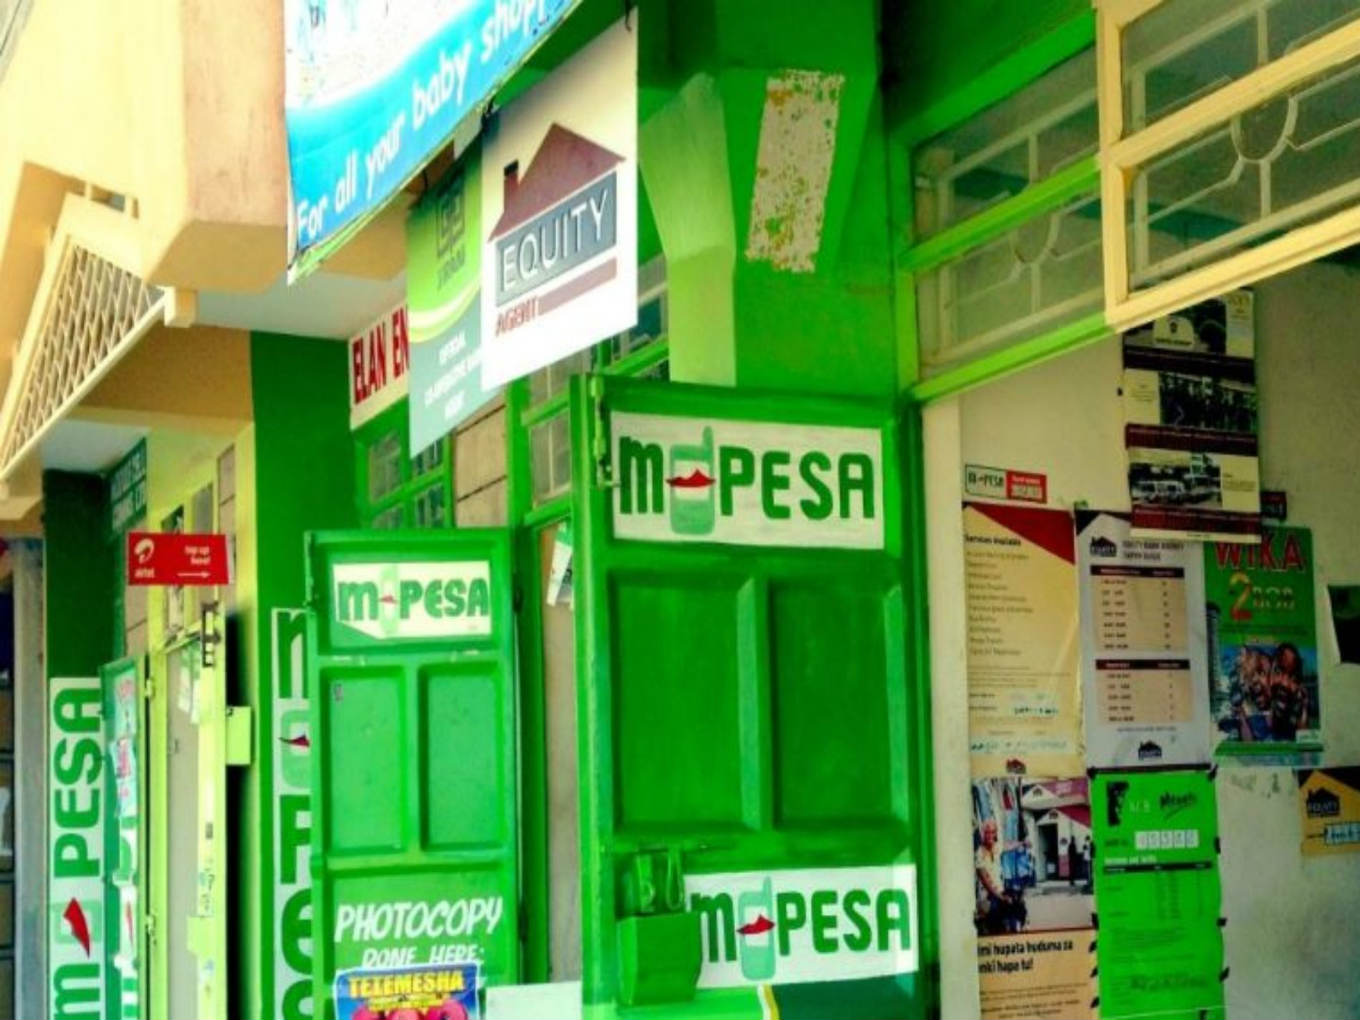 Vodafone Idea May Hive Off M-Pesa To Comply With RBI